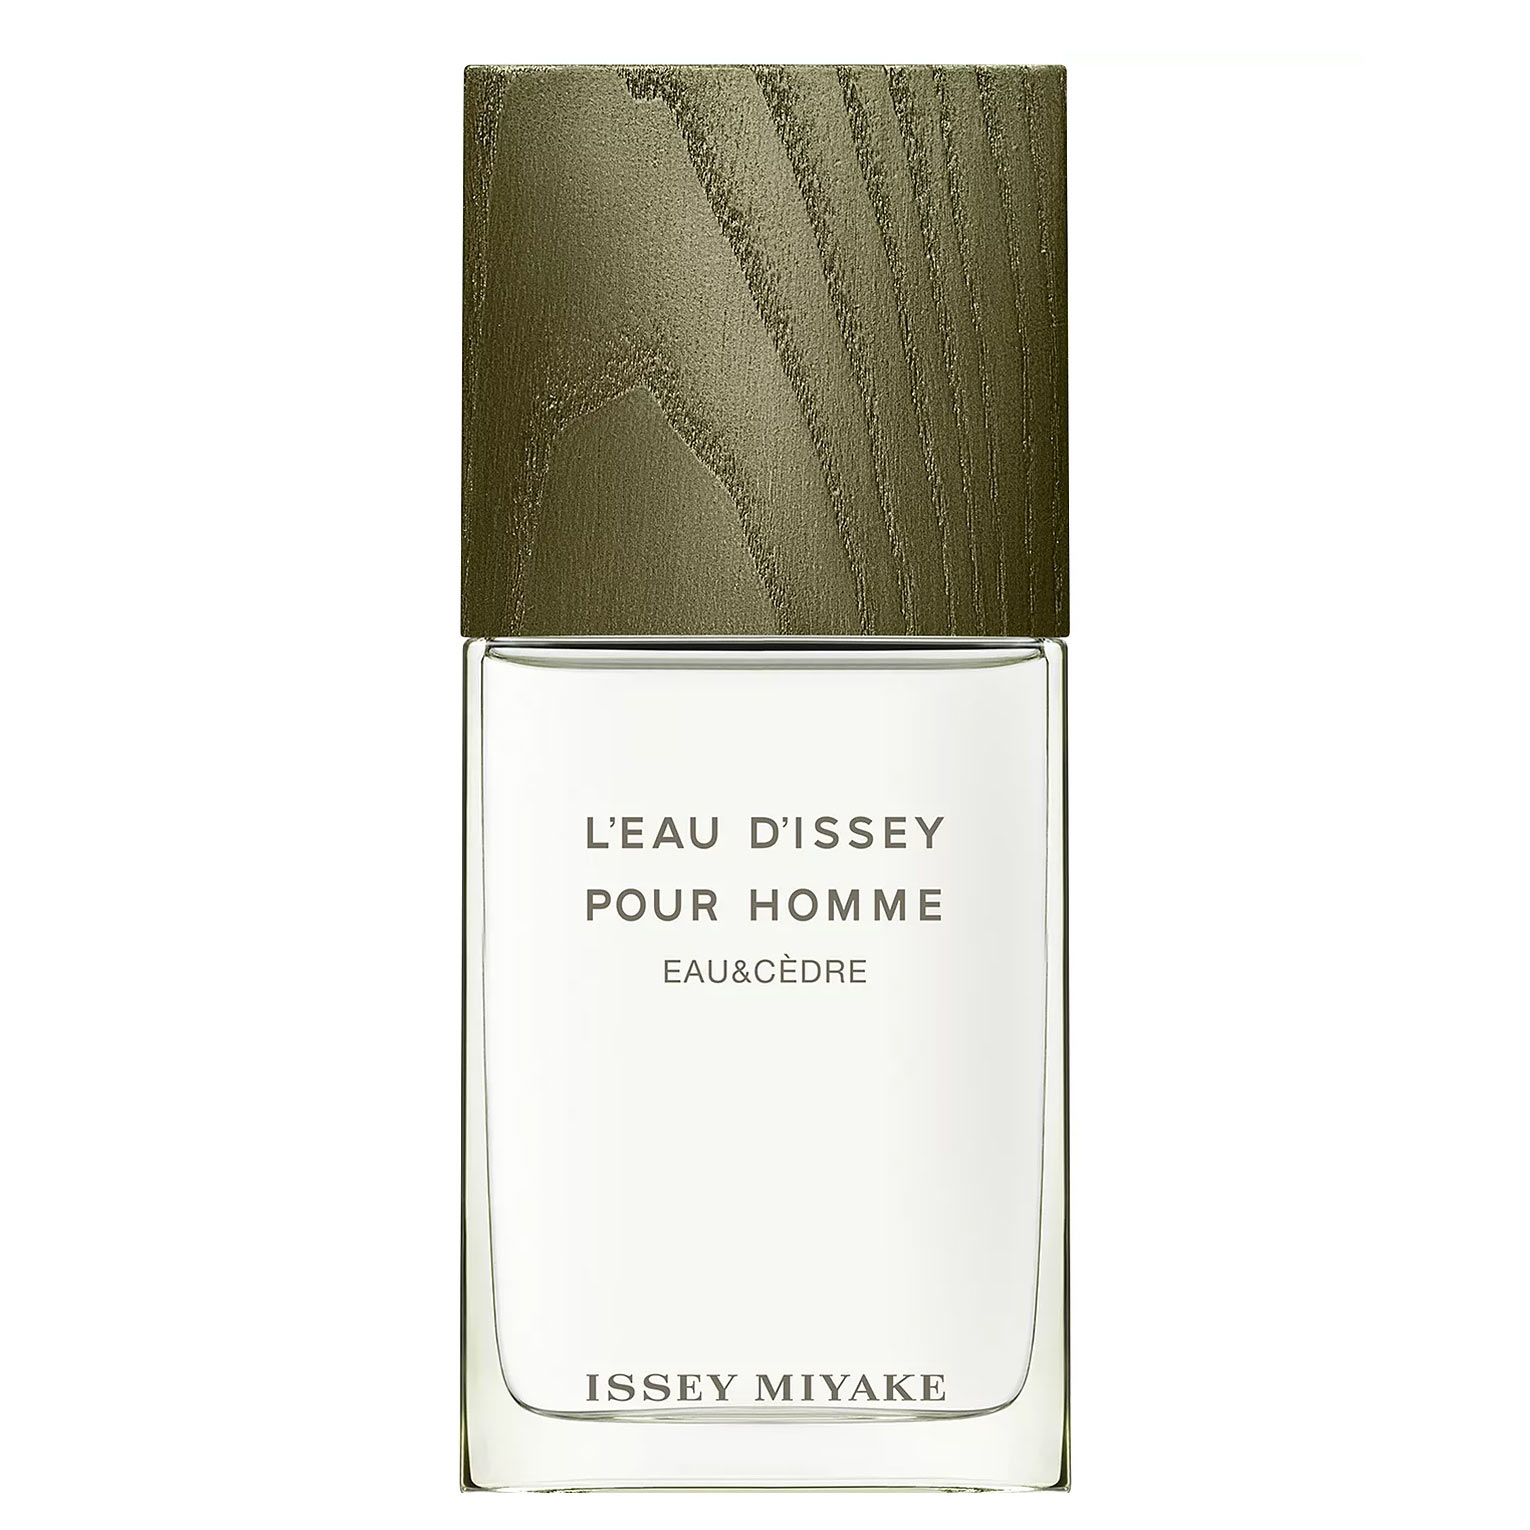 L'eau-D'Issey-Eau-and-Cedre-Issey-Miyake